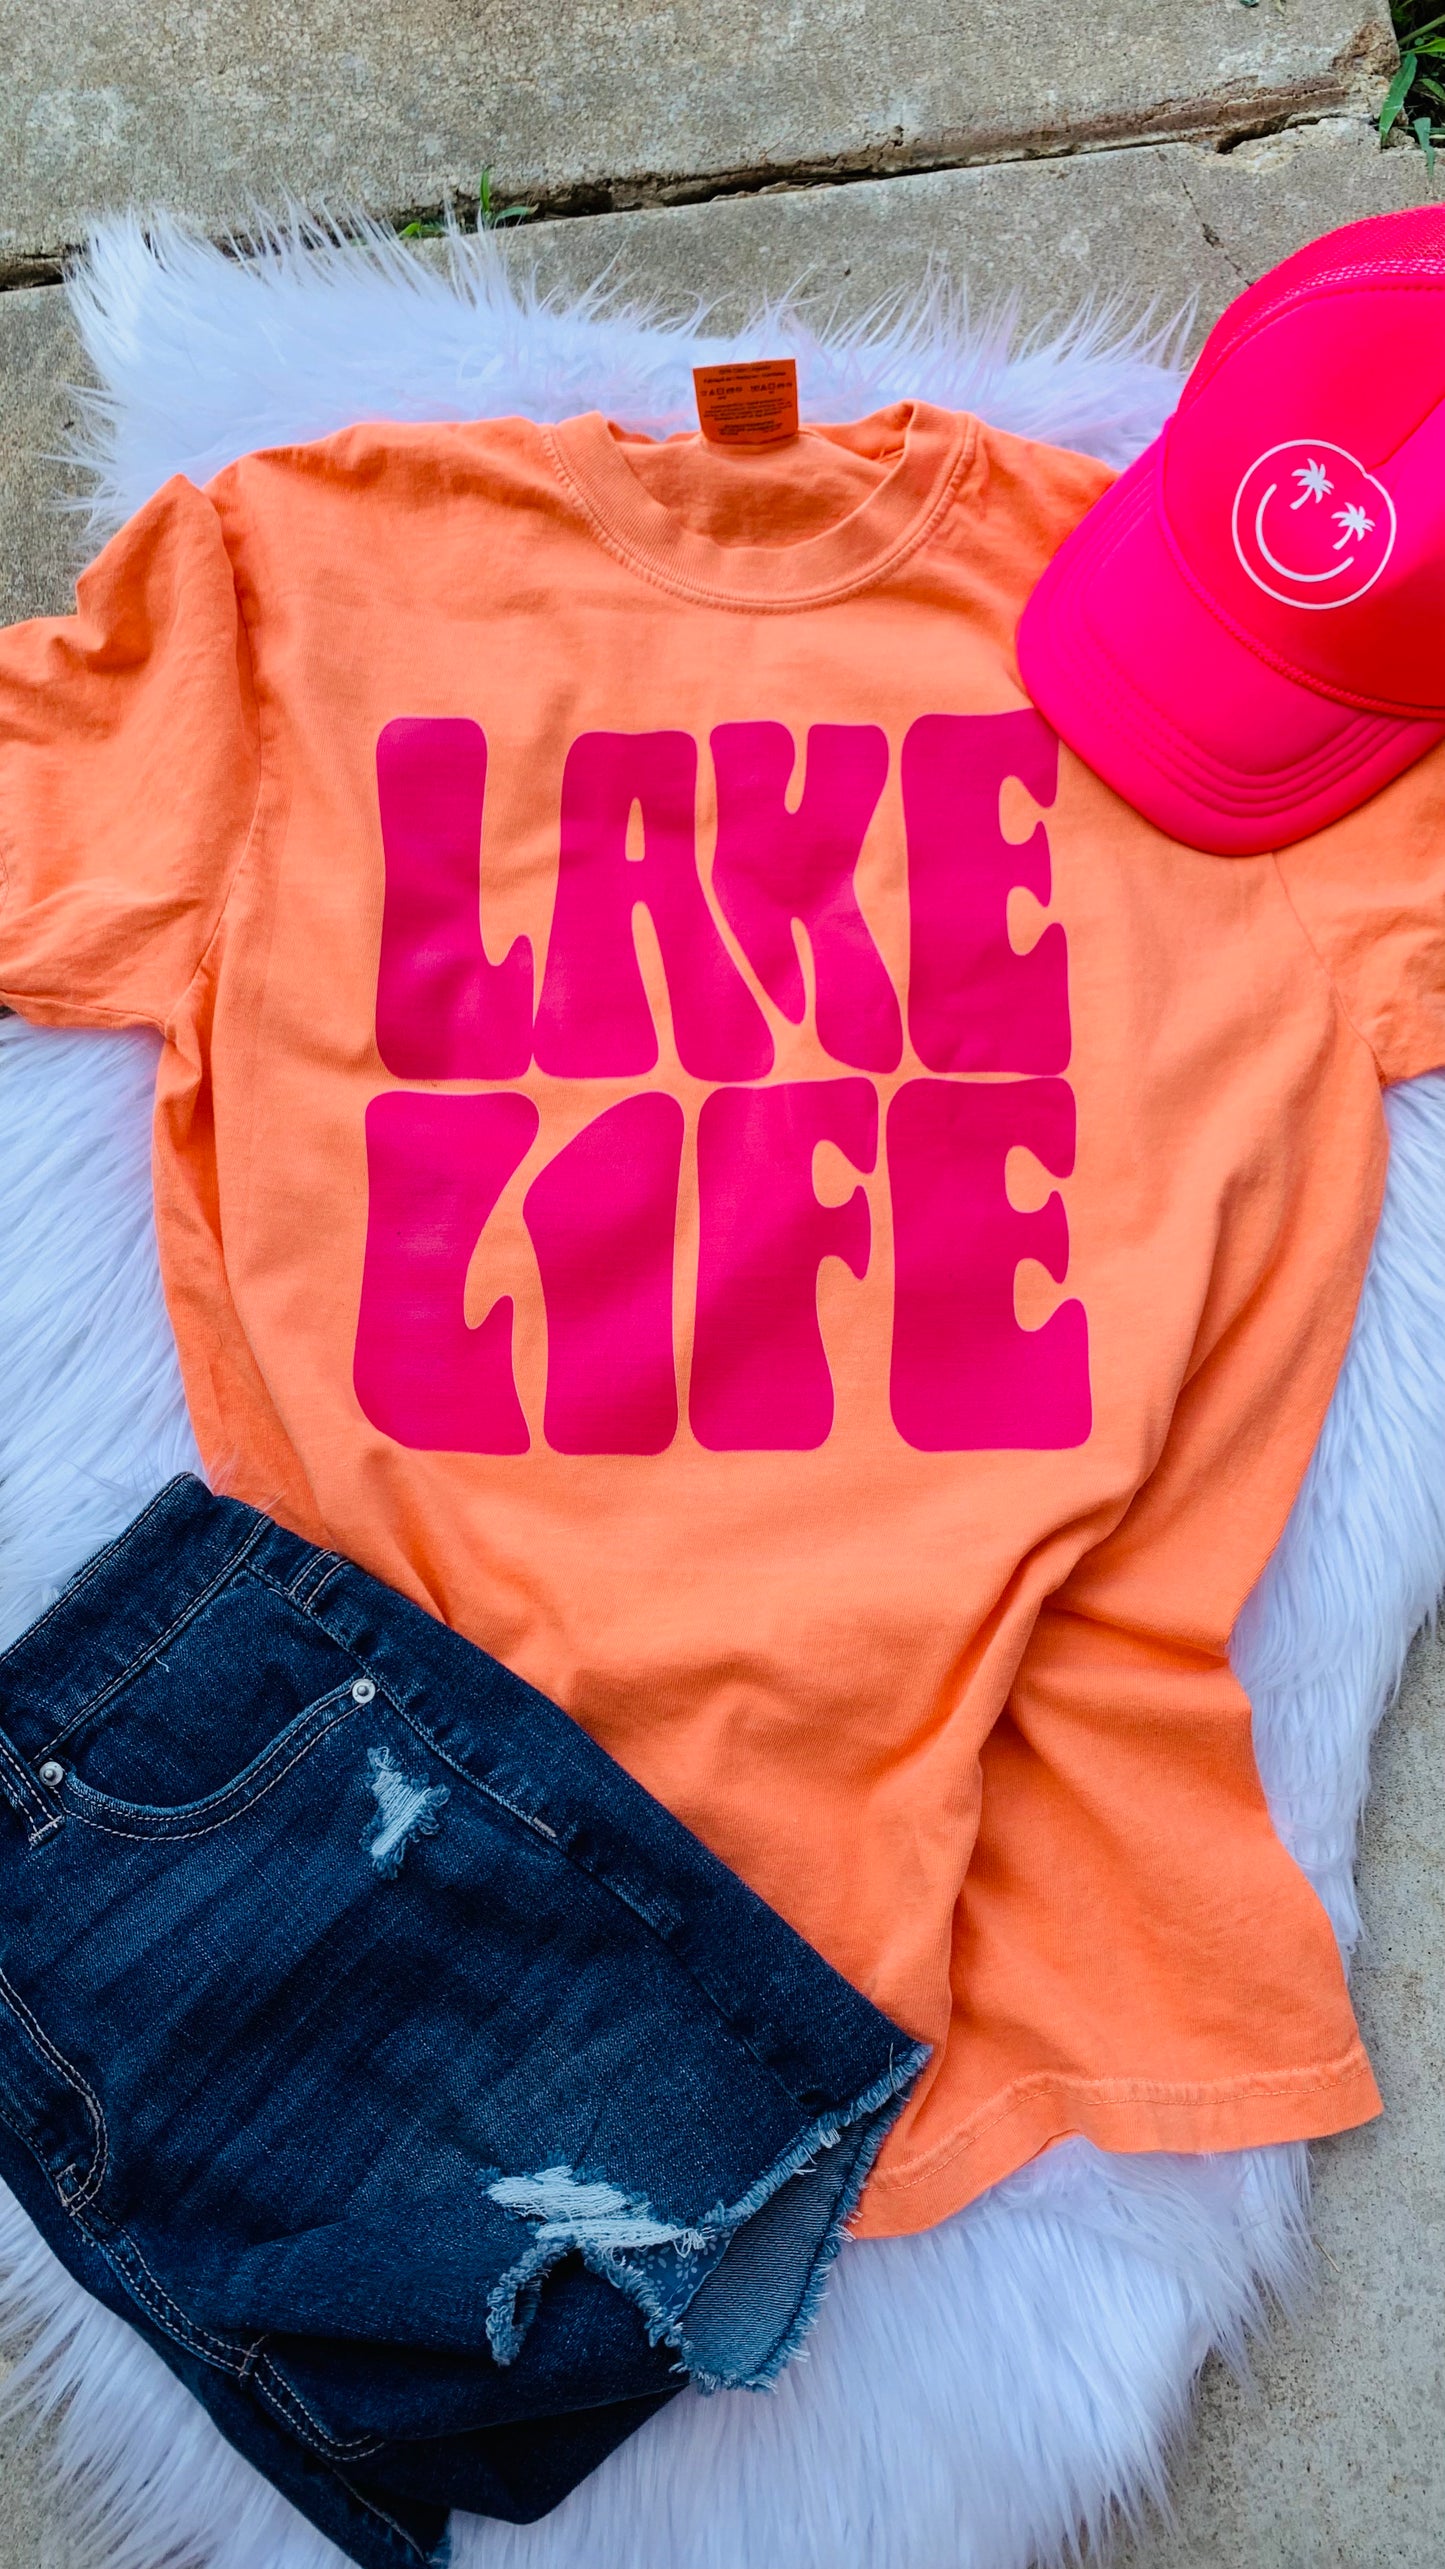 Lake Life youth - ( Beach Life & River Life also available) youth